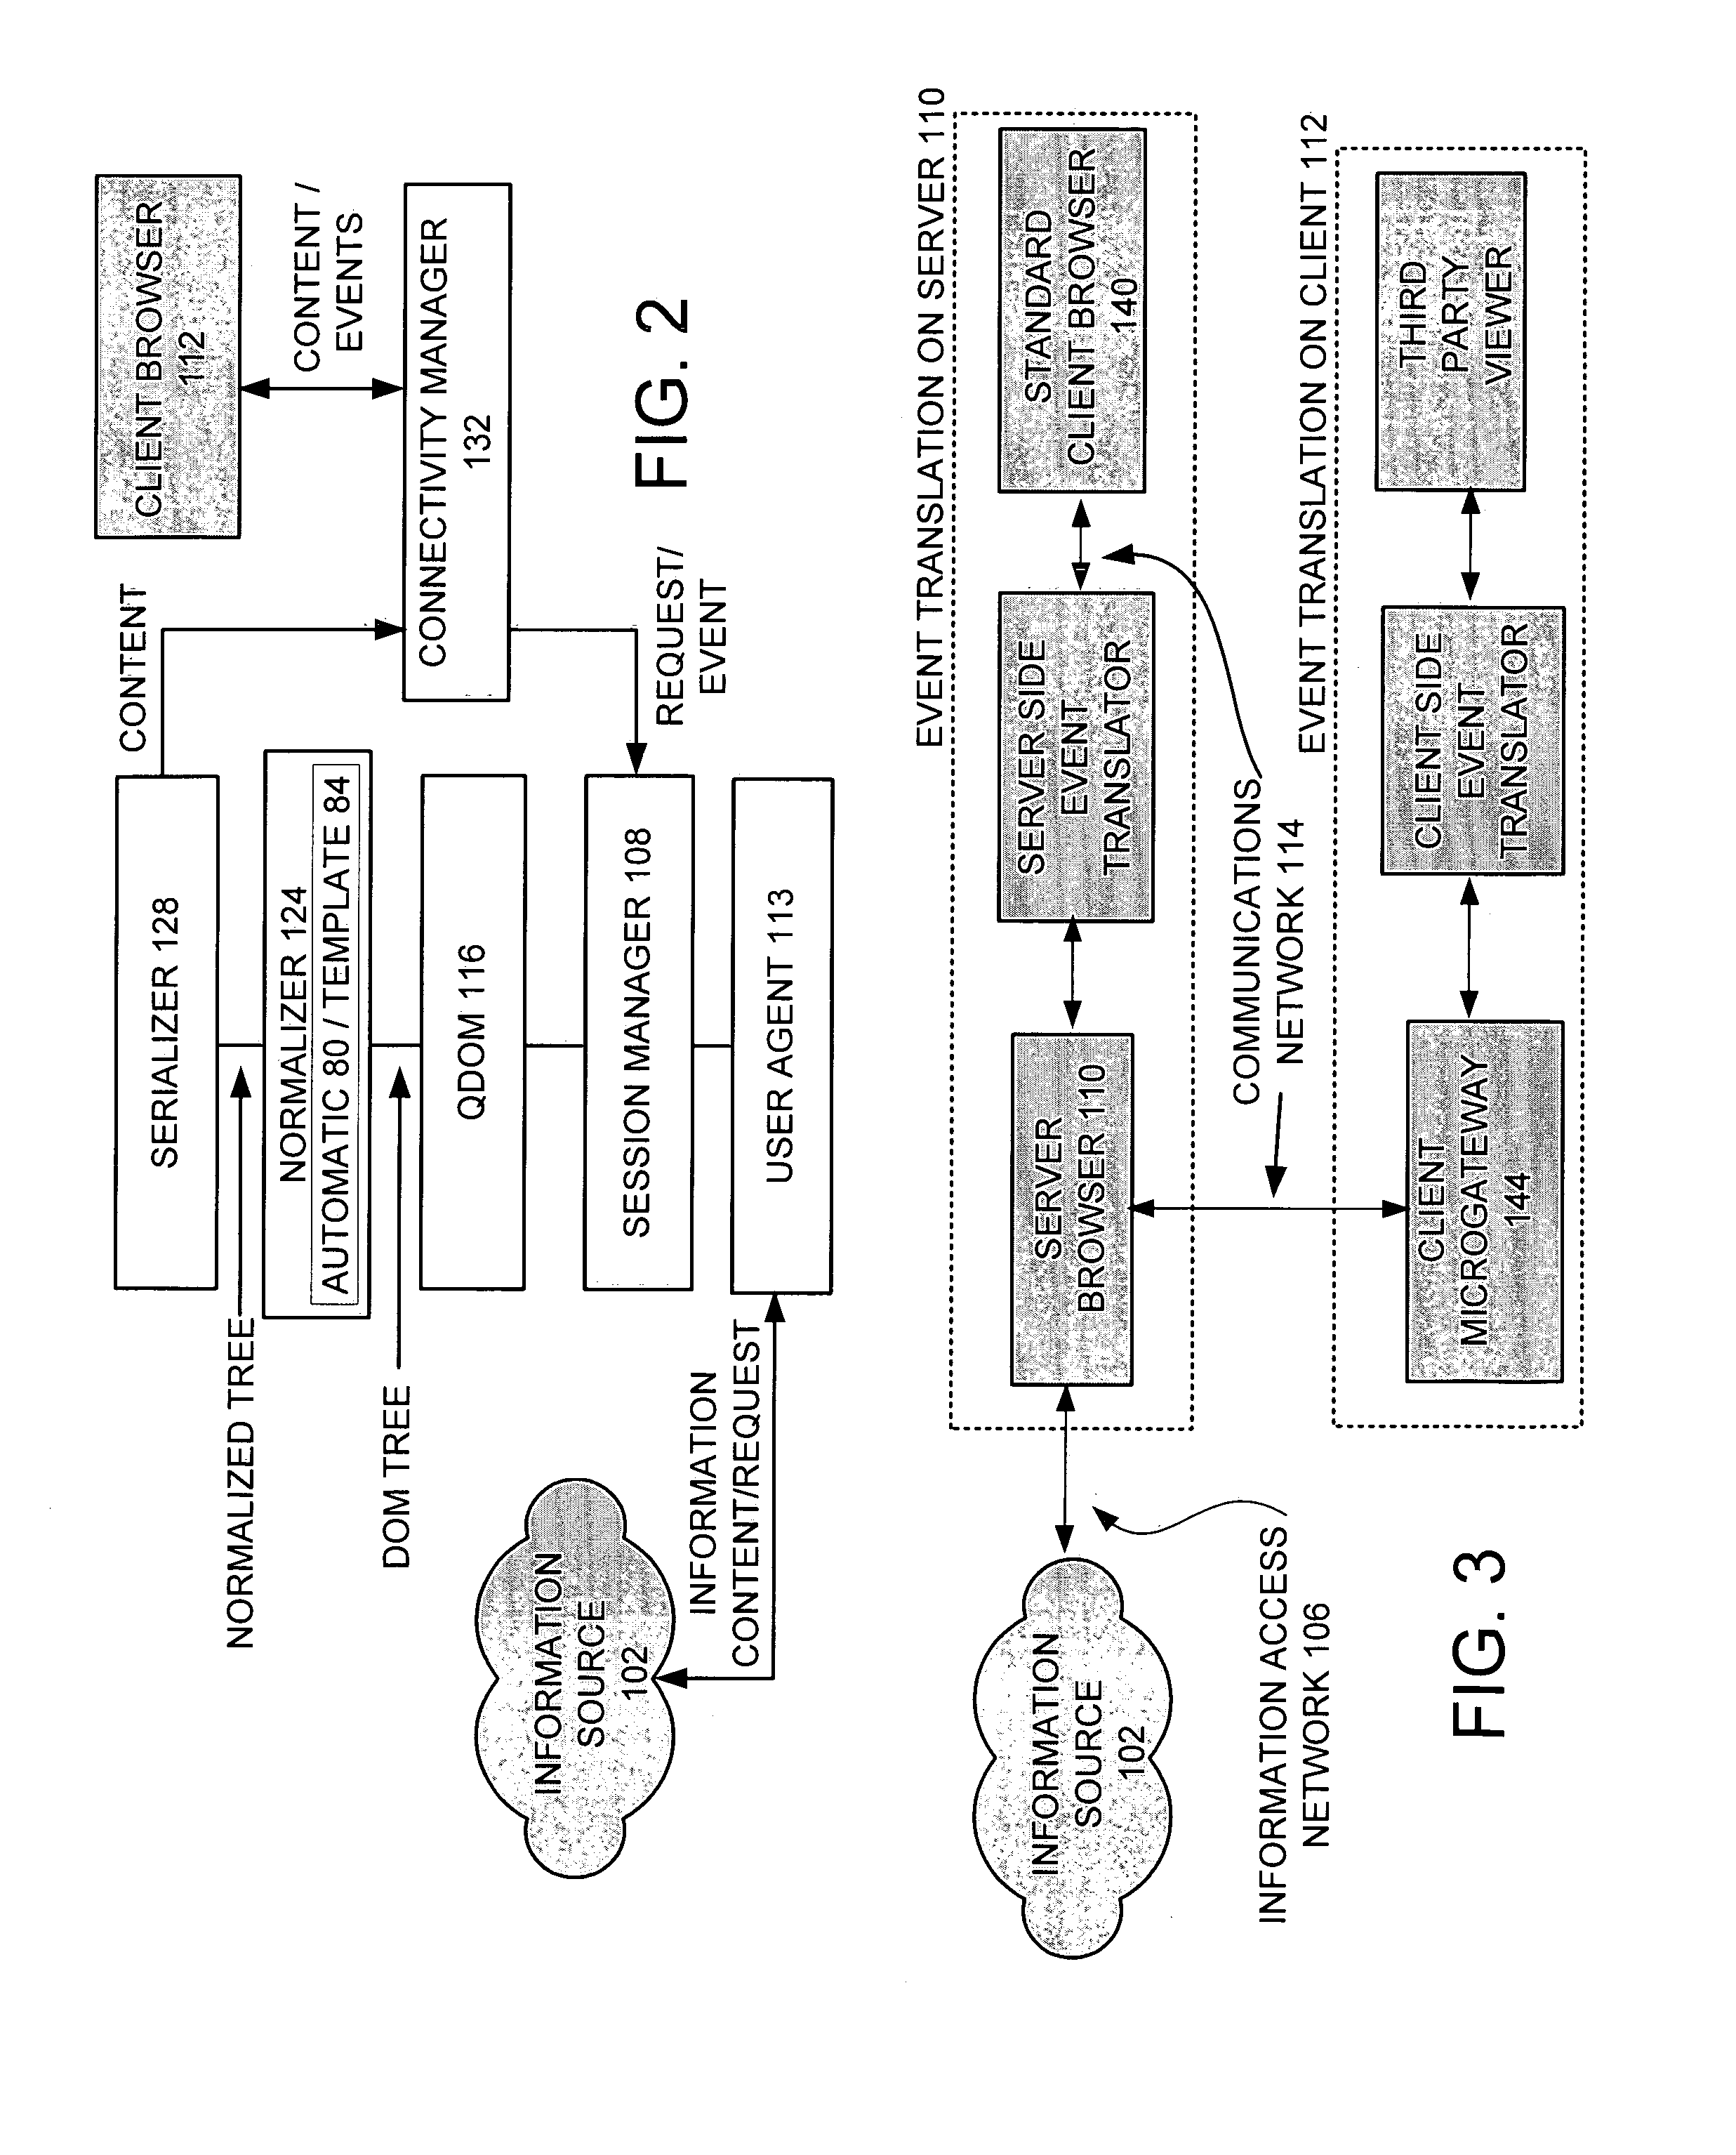 System and method for accessing customized information over the internet using a browser for a plurality of electronic devices